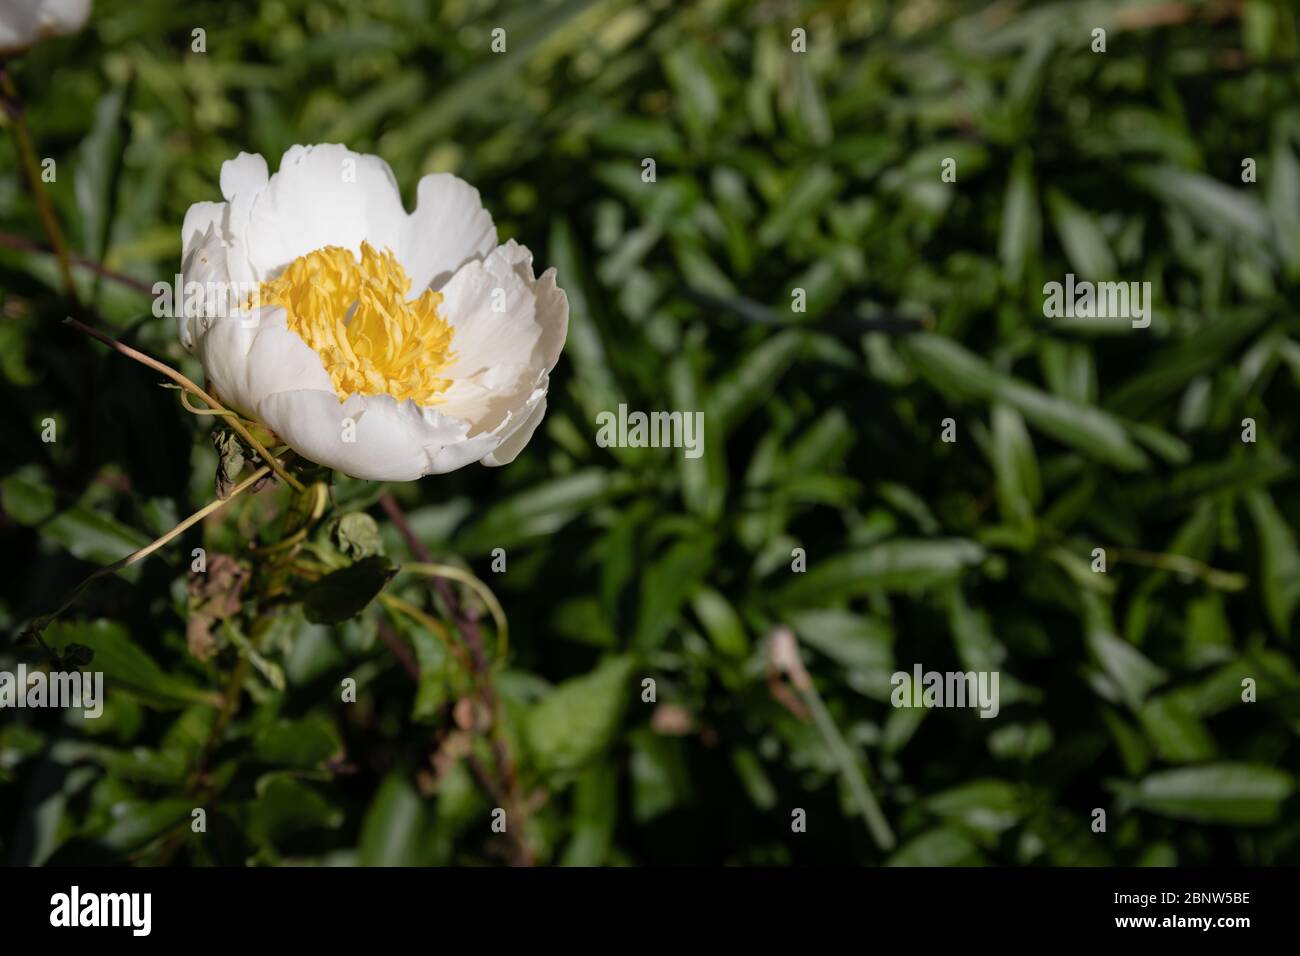 Single white peony flower with yellow anemone center, off center with selective focus and copy space, horizontal aspect Stock Photo